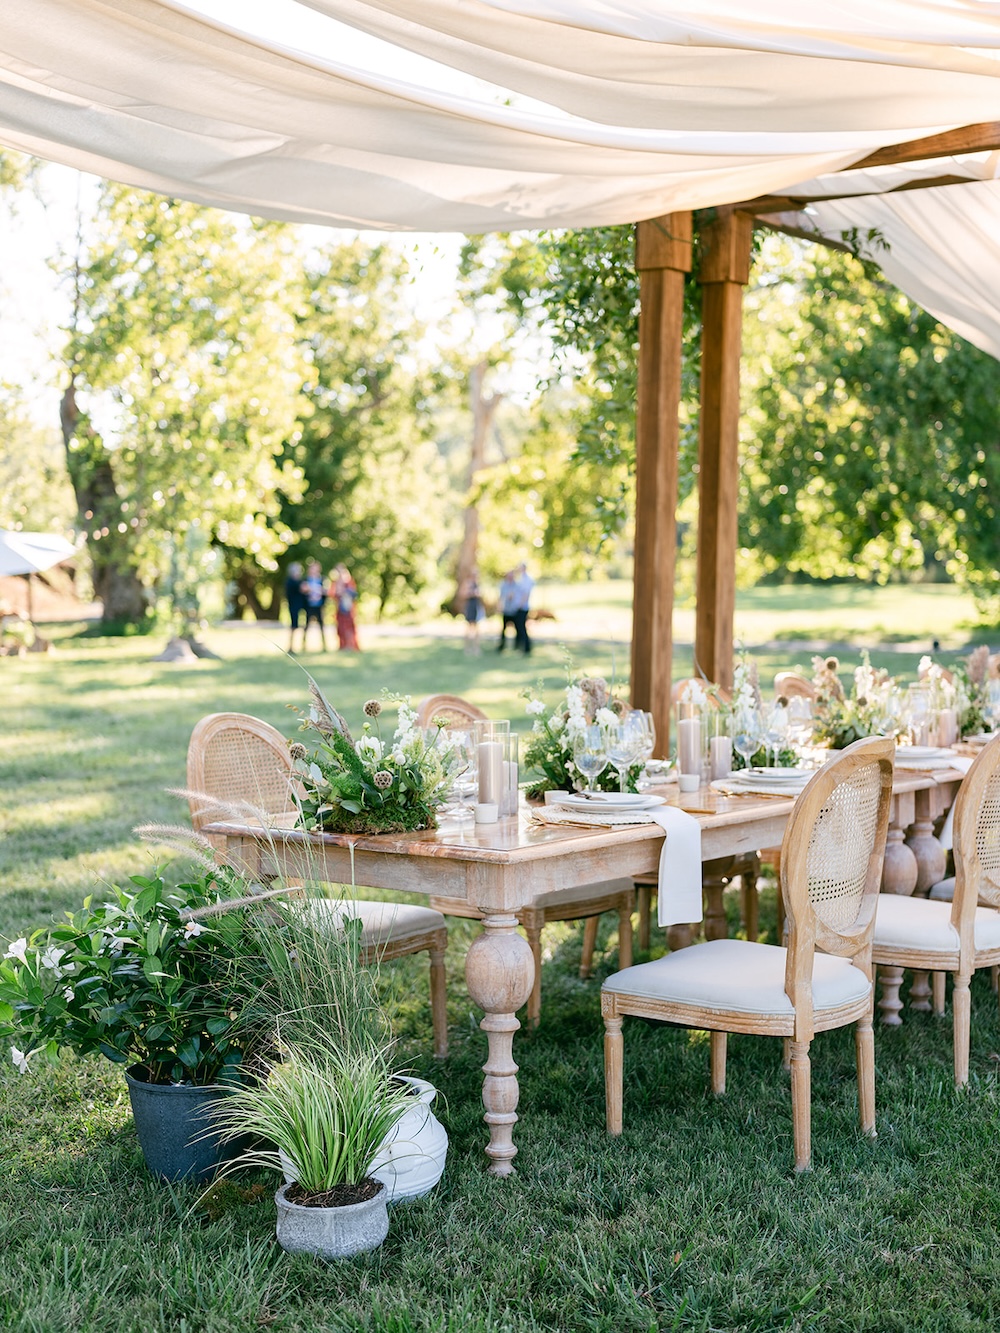 Boho chic dinner design, farmhouse tables. Neutral color palette. Milestone birthday party celebration weekend in Middleburg, Virginia. Sarah Bradshaw Photography.